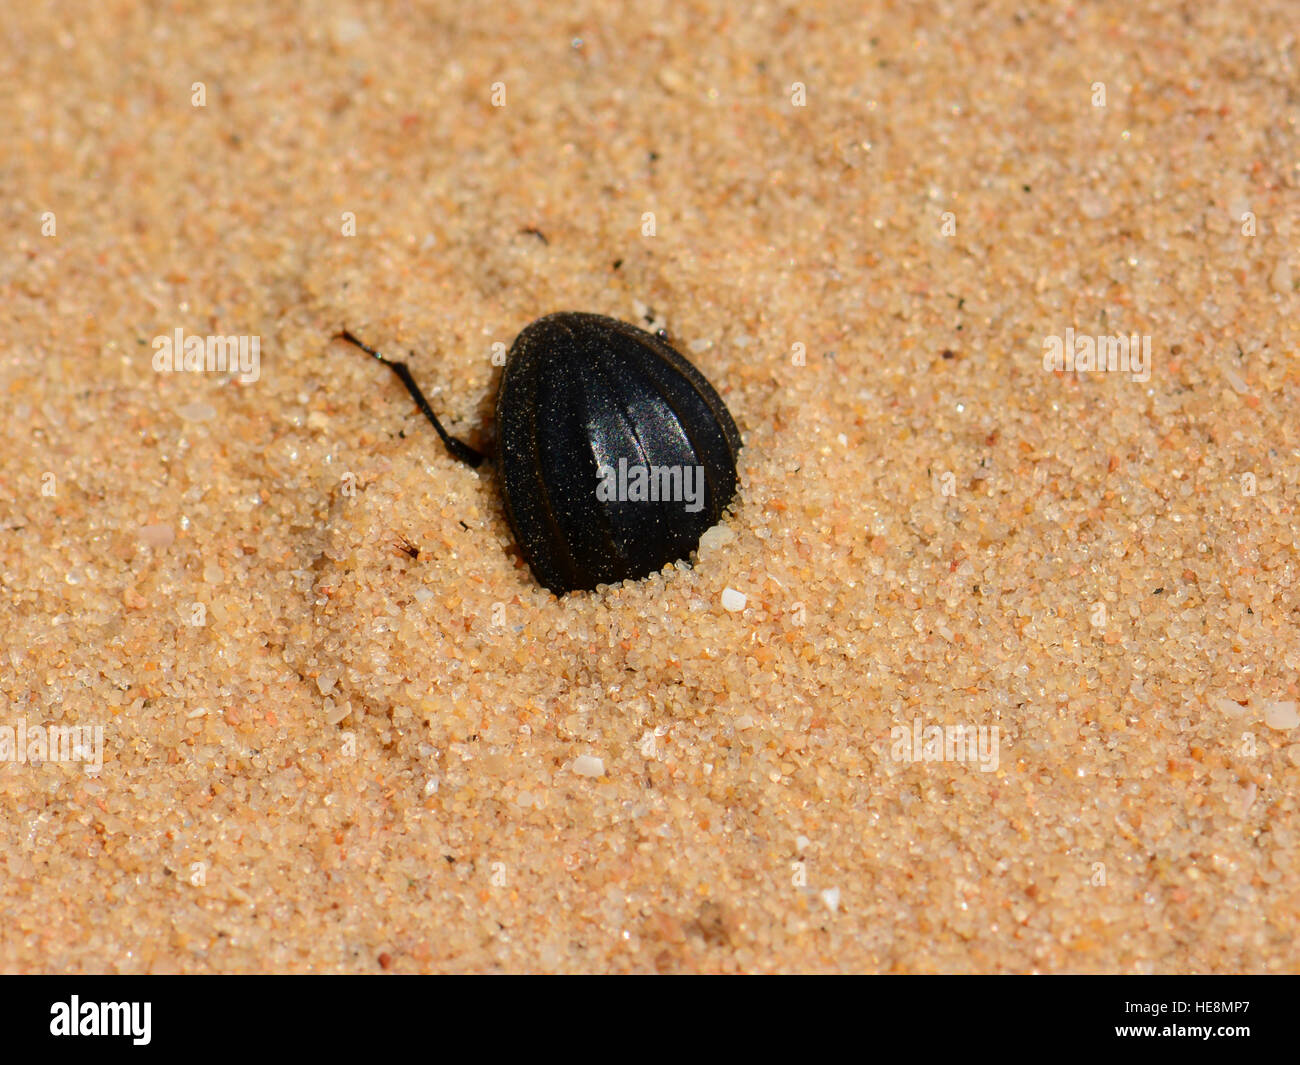 Beetle digging in the sand Stock Photo